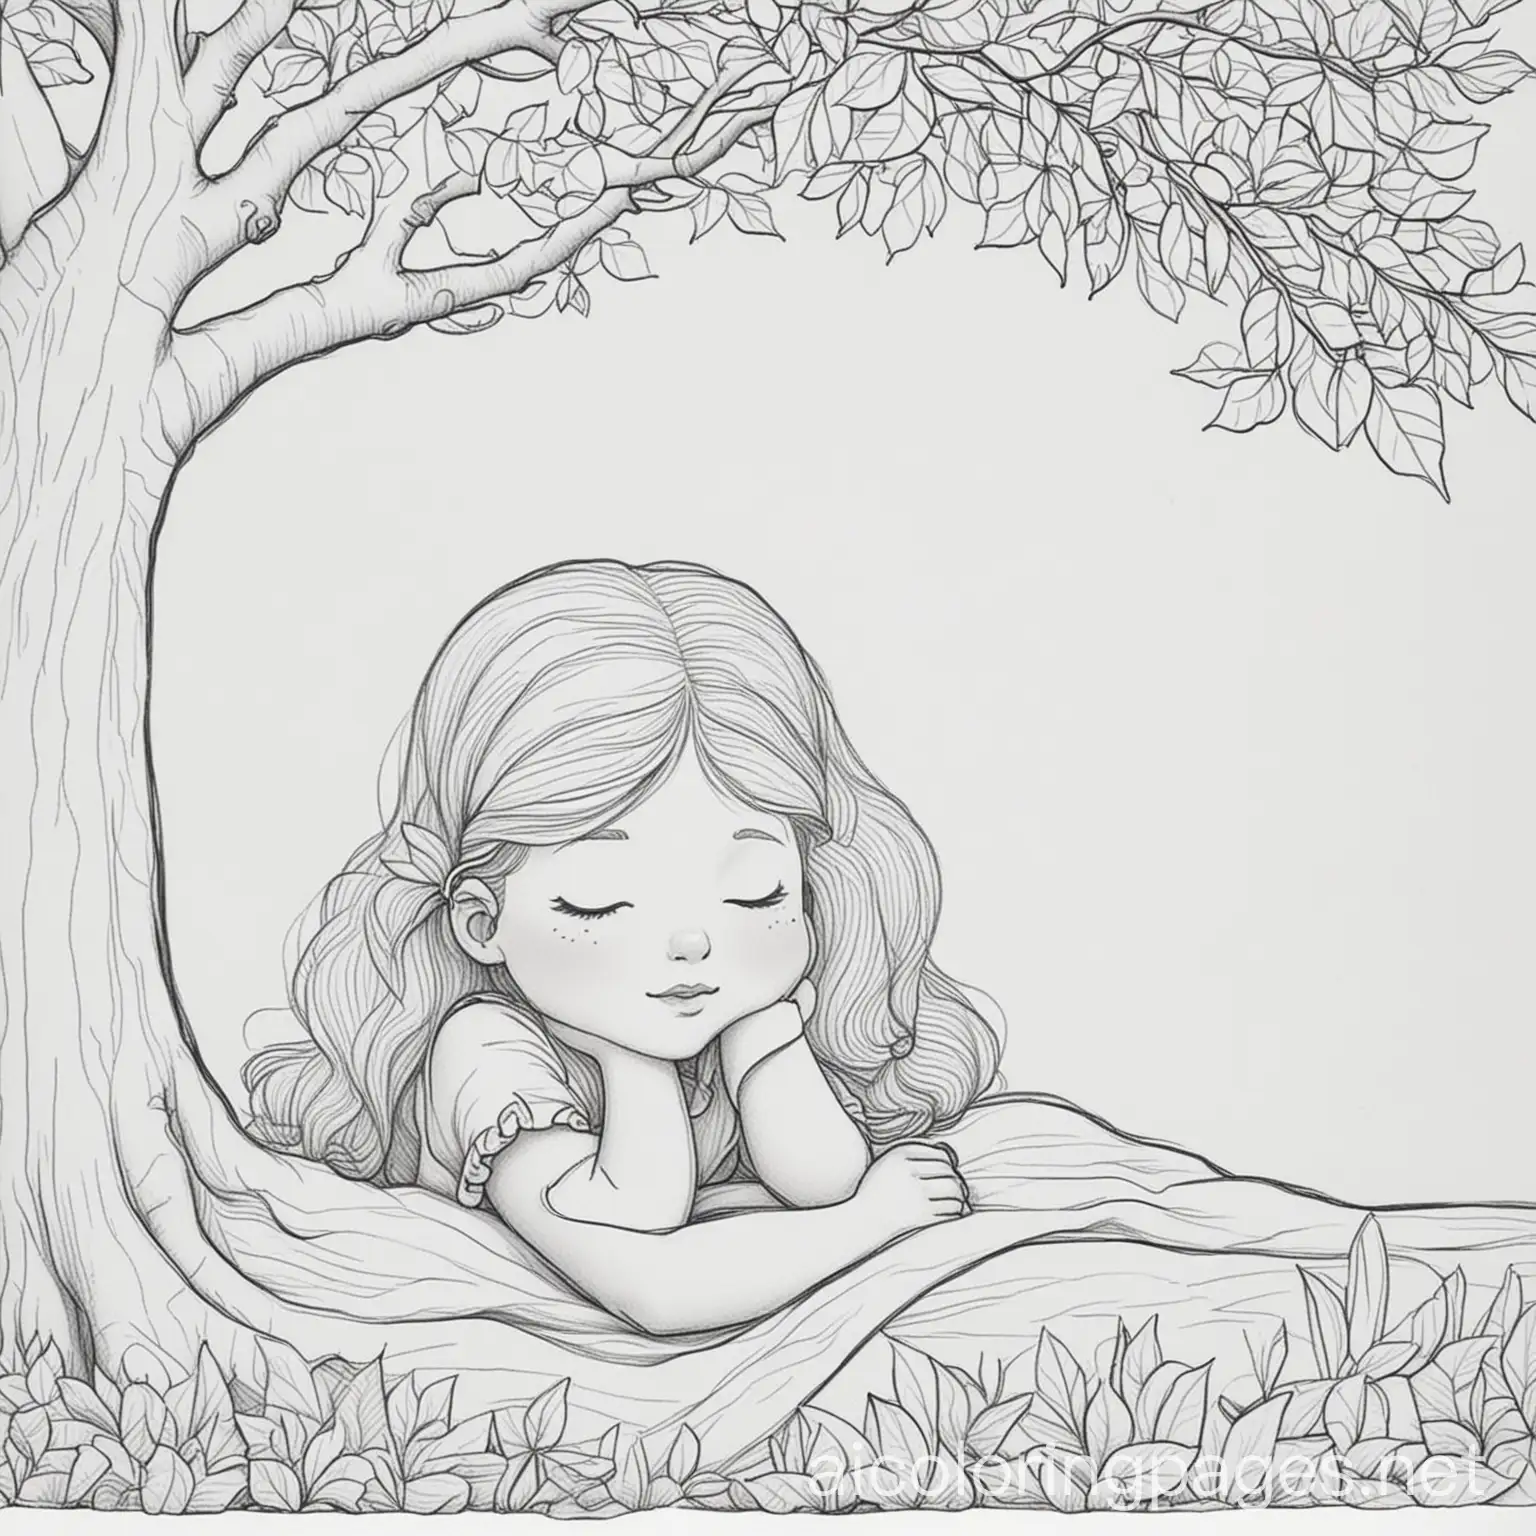 A little girl sleeping while sitting under a tree. Her eyes are closed. Colouring page, black and white, line art, white background. Simplicity, ample white space. The background of the colouring page is white to make it easy for young kids to colour within the lines. The outlines of the subjects are easy to distinguish. Very simple design , Coloring Page, black and white, line art, white background, Simplicity, Ample White Space. The background of the coloring page is plain white to make it easy for young children to color within the lines. The outlines of all the subjects are easy to distinguish, making it simple for kids to color without too much difficulty